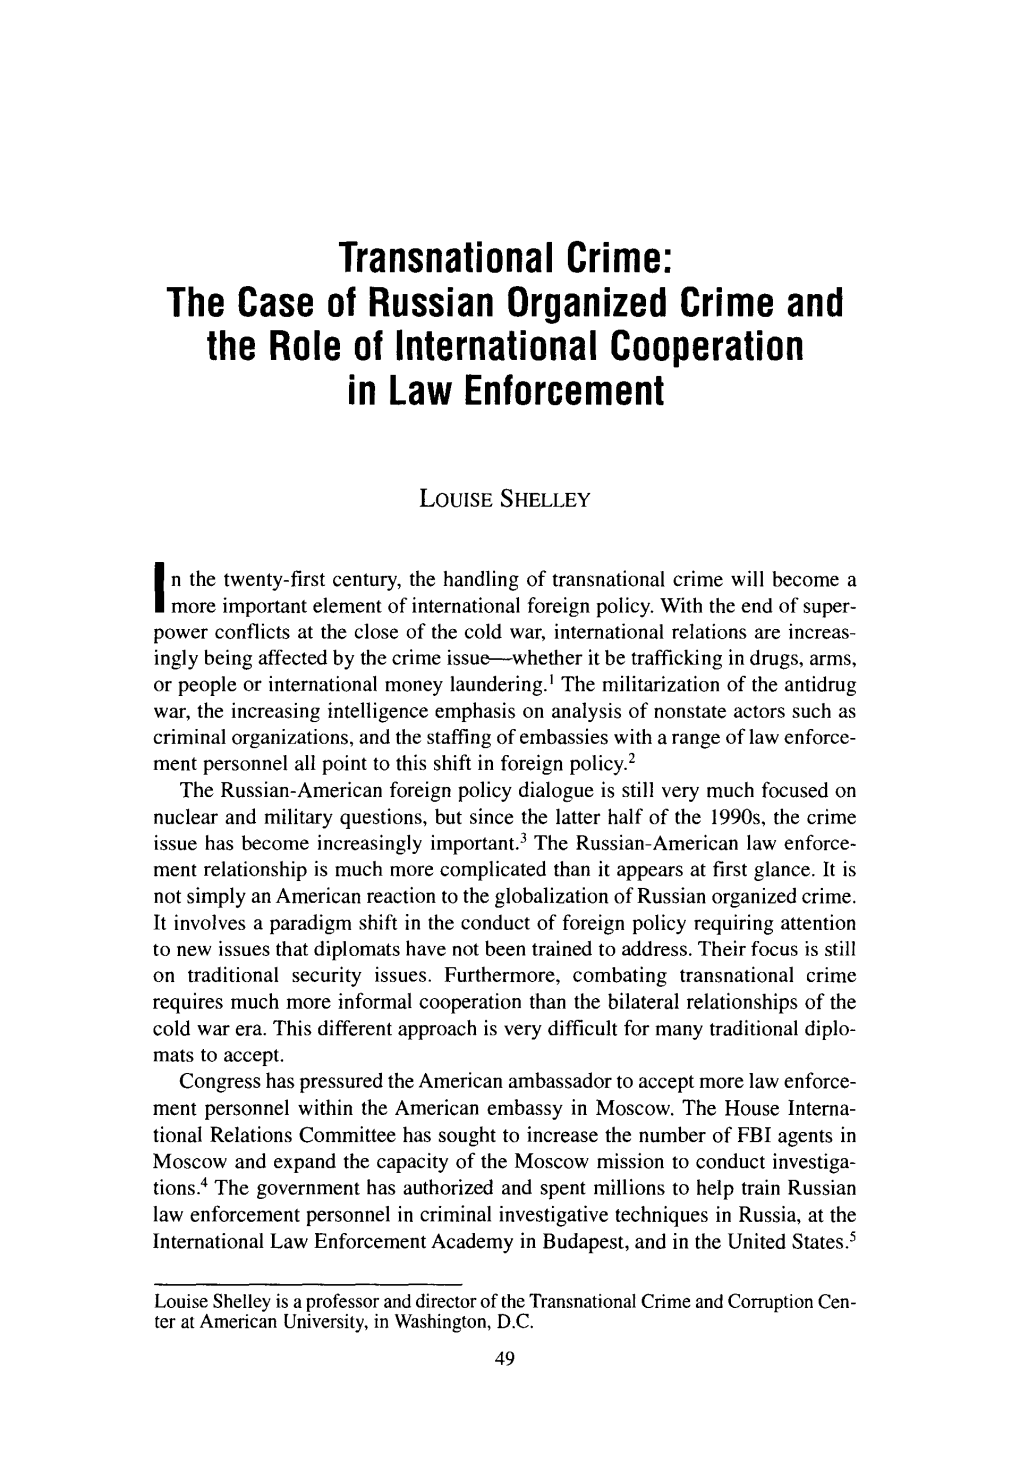 The Case of Russian Organized Crime and the Role of International Cooperation in Law Enforcement